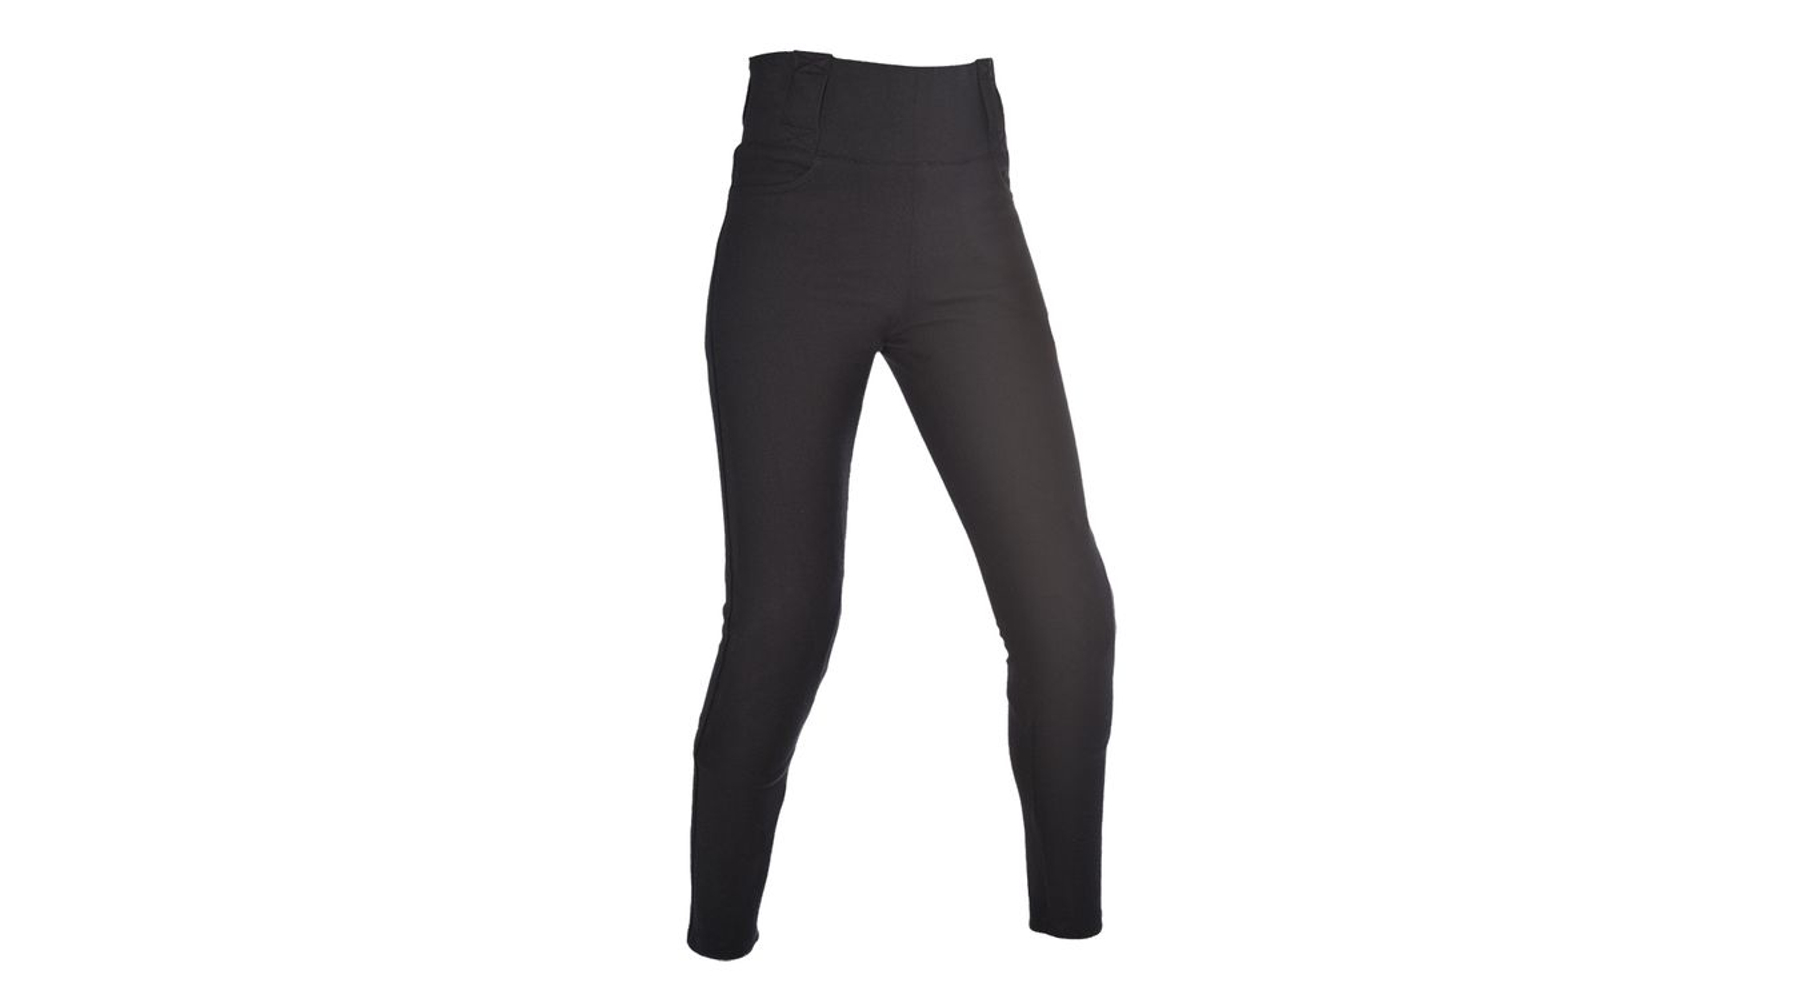 Leggings Definition Oxford Dictionary